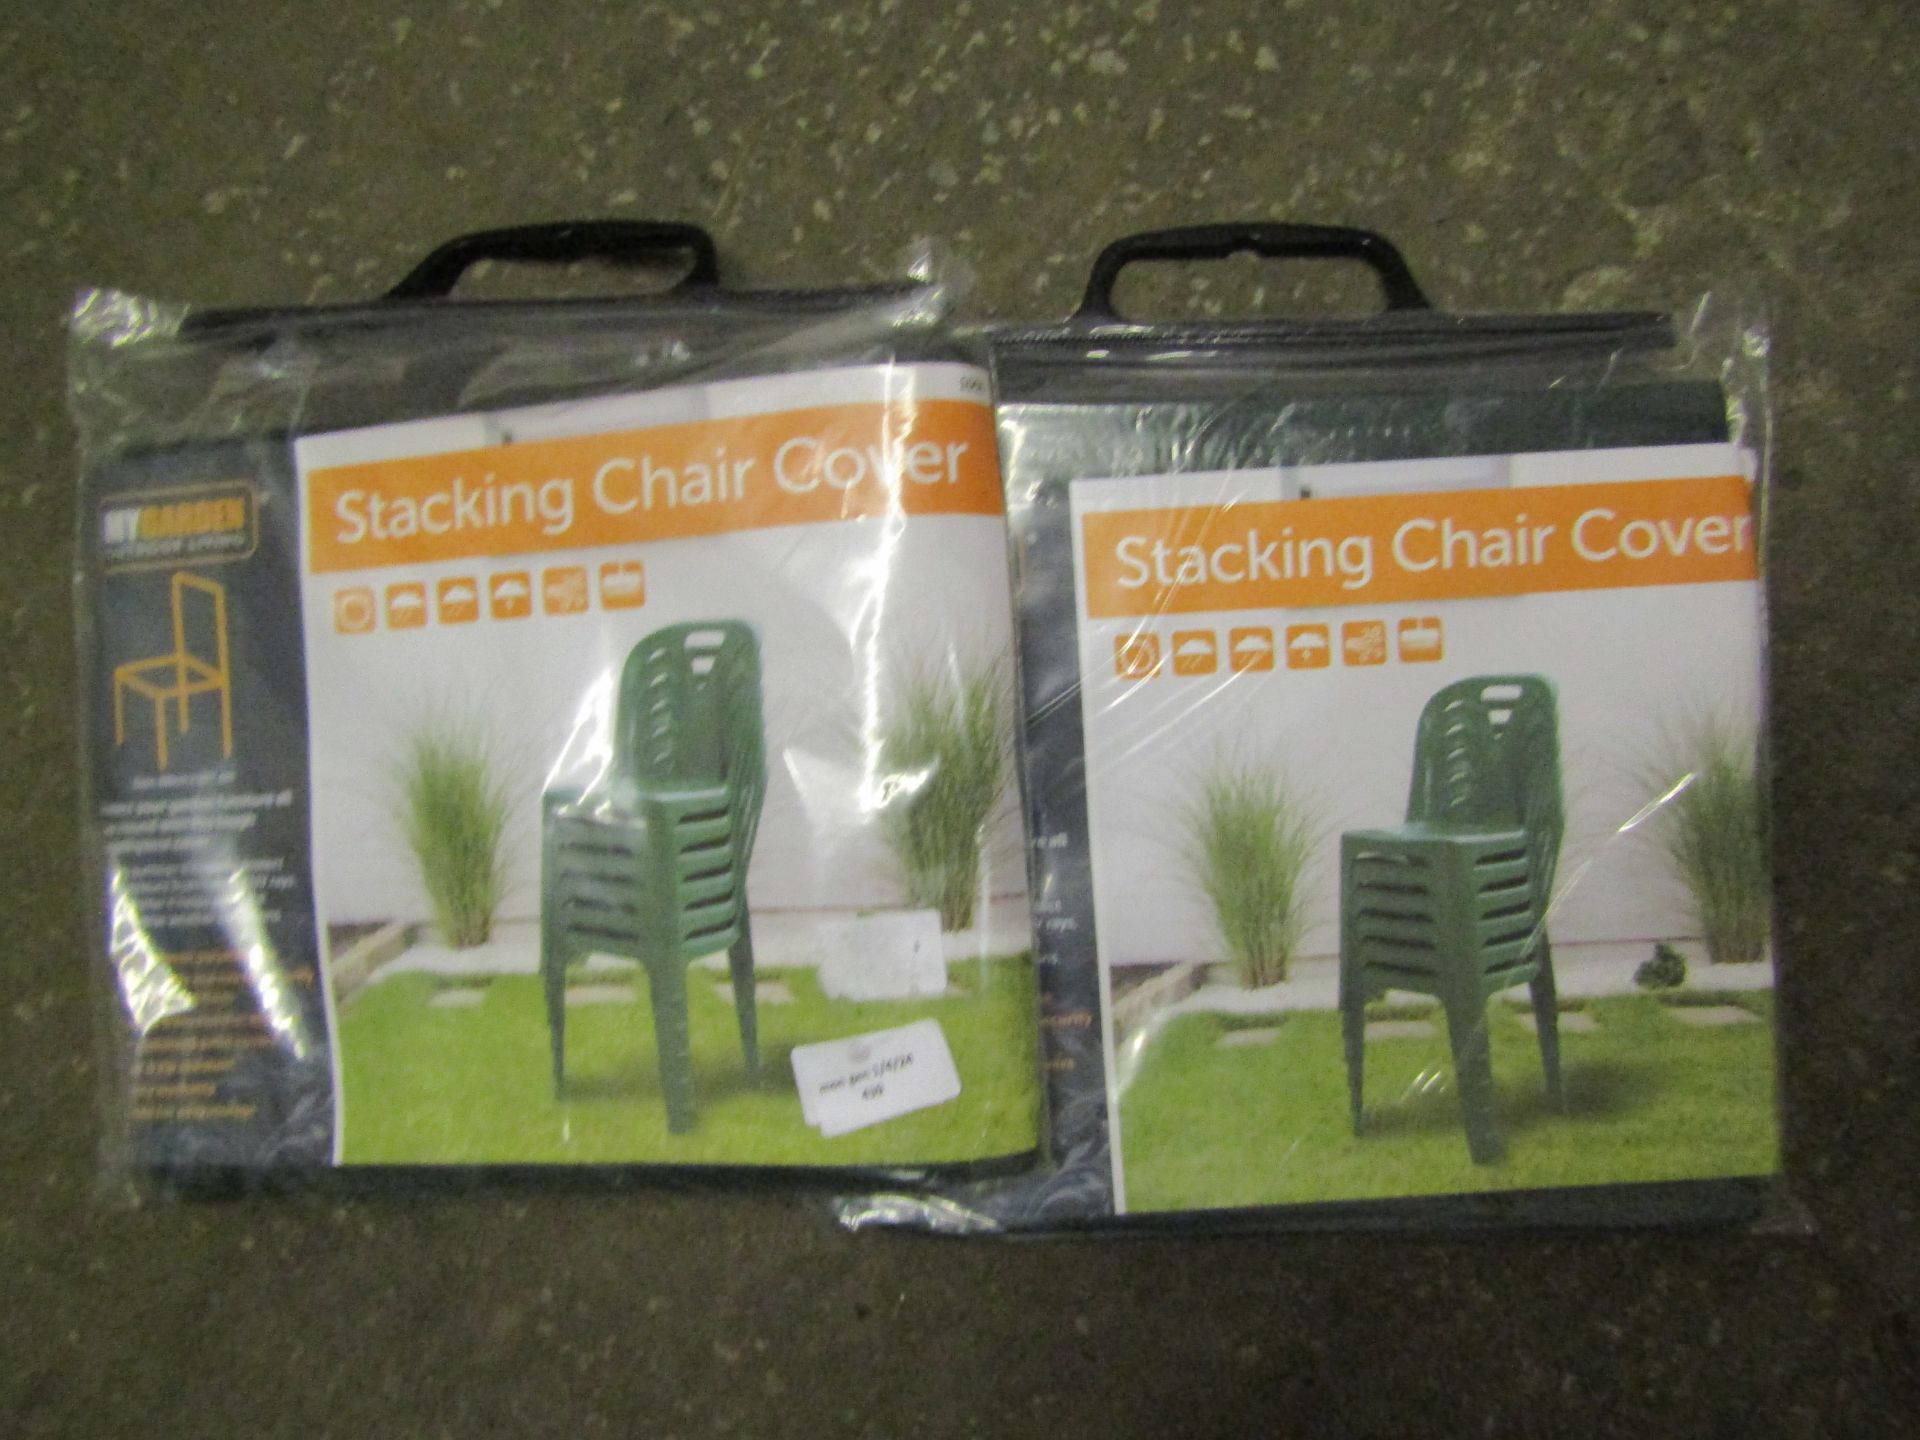 2x My Garden Stacking Chair Cover Unchecked & Packaged